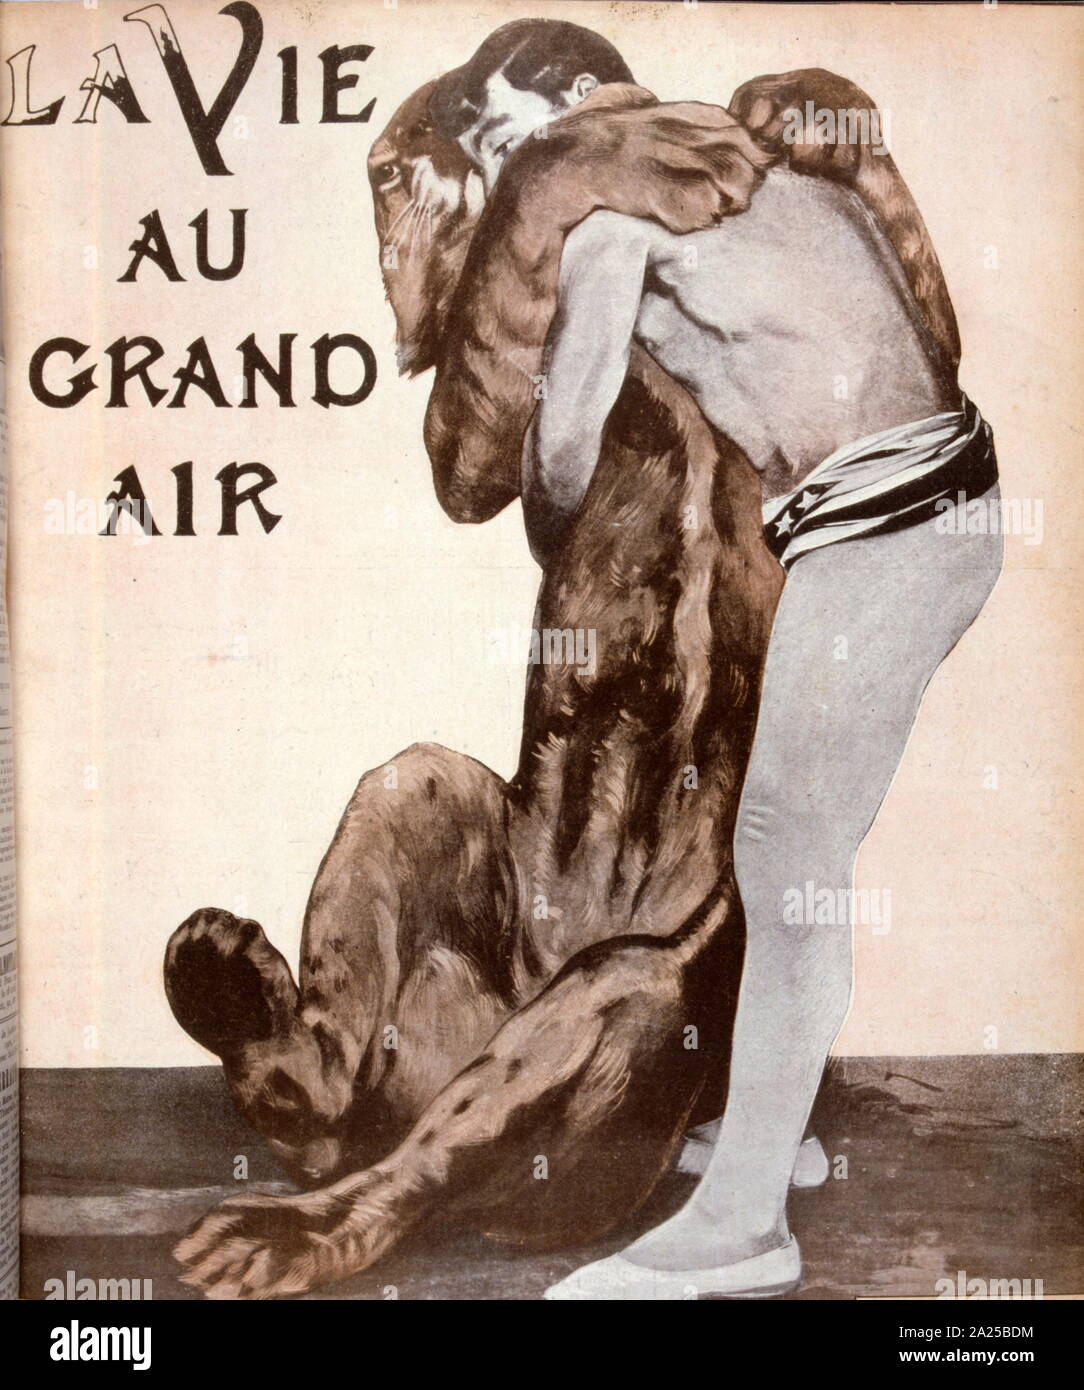 Vintage magazine illustration of a circus performer embracing a lioness 1905 Stock Photo